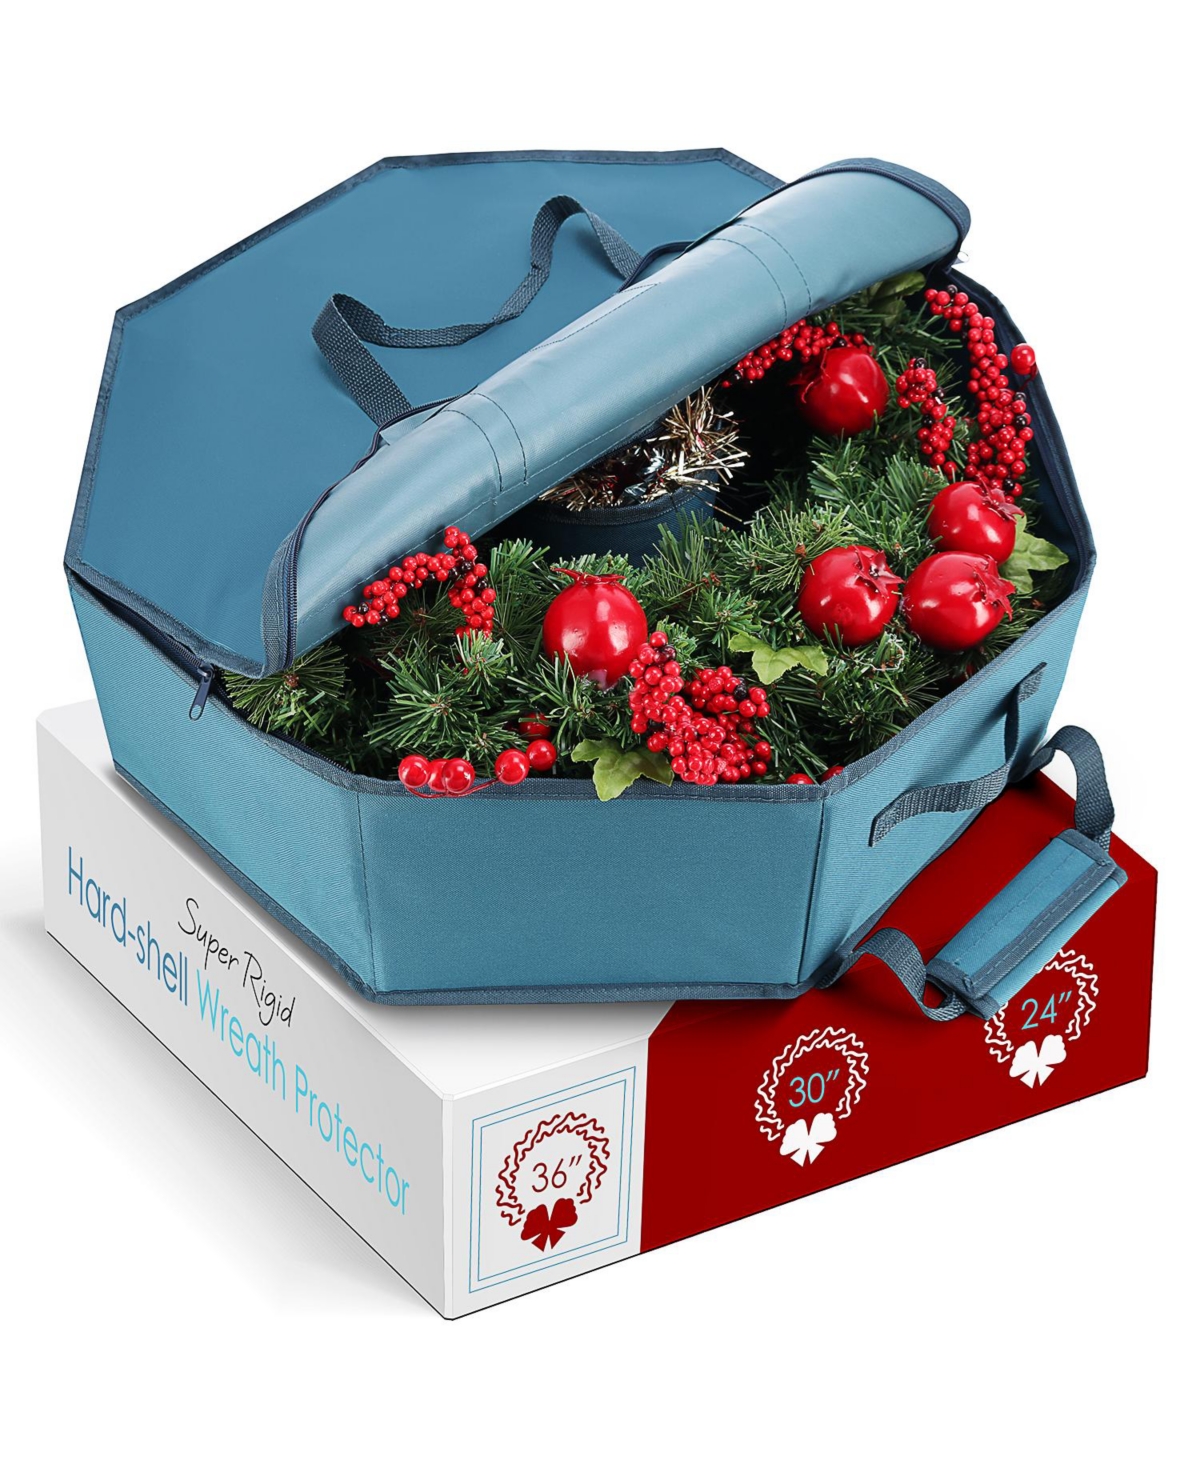 Premium Hard Shell Wreath Storage Bag with Interior Pockets, Dual Zipper and Handles - 36 Inch - Blue